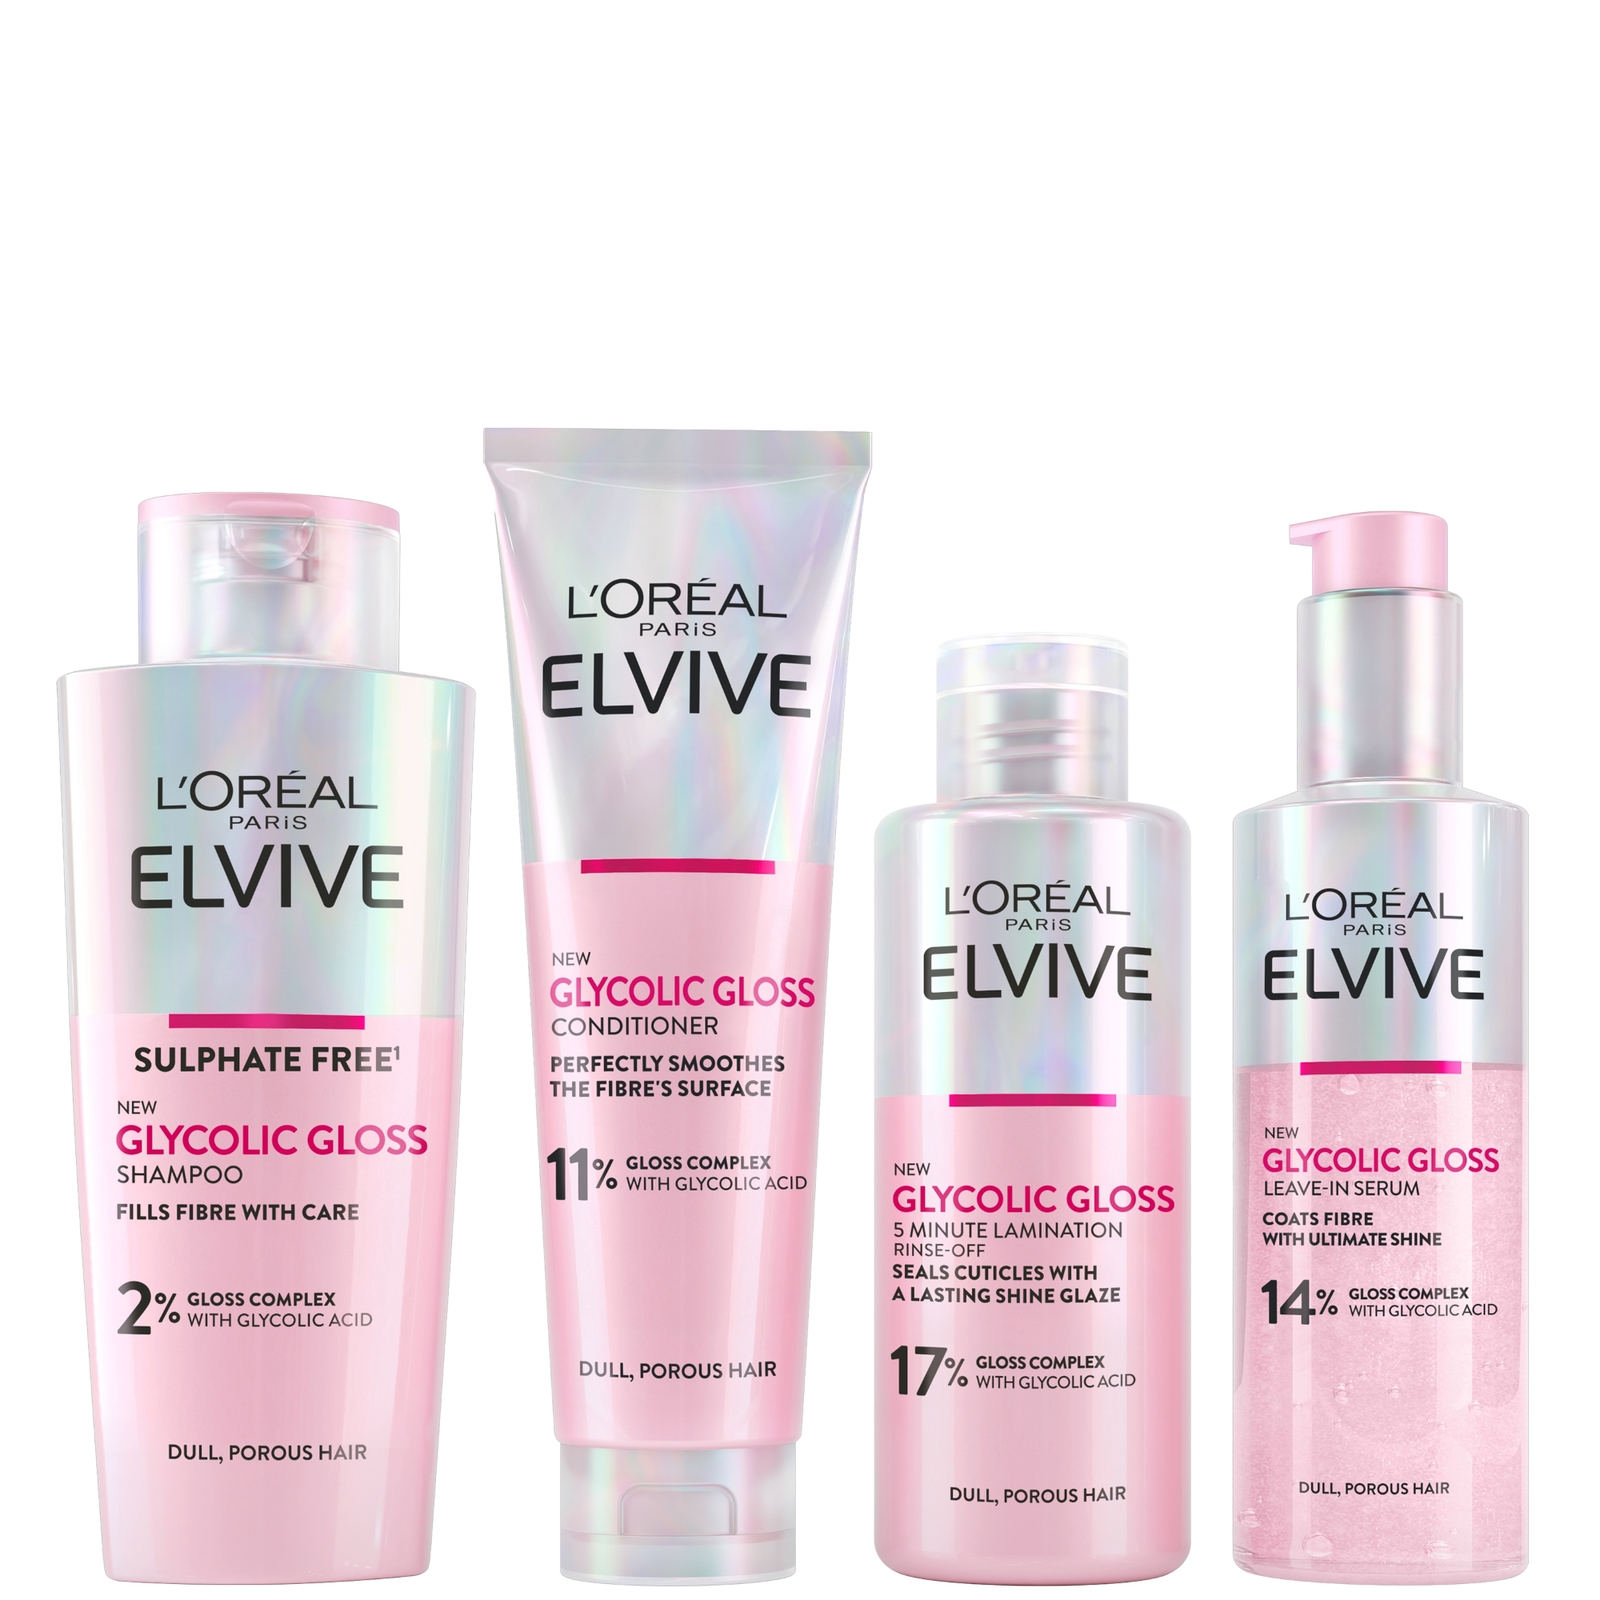 L'Oreal Paris Elvive Glycolic Gloss Glossing Routine for Dull Hair